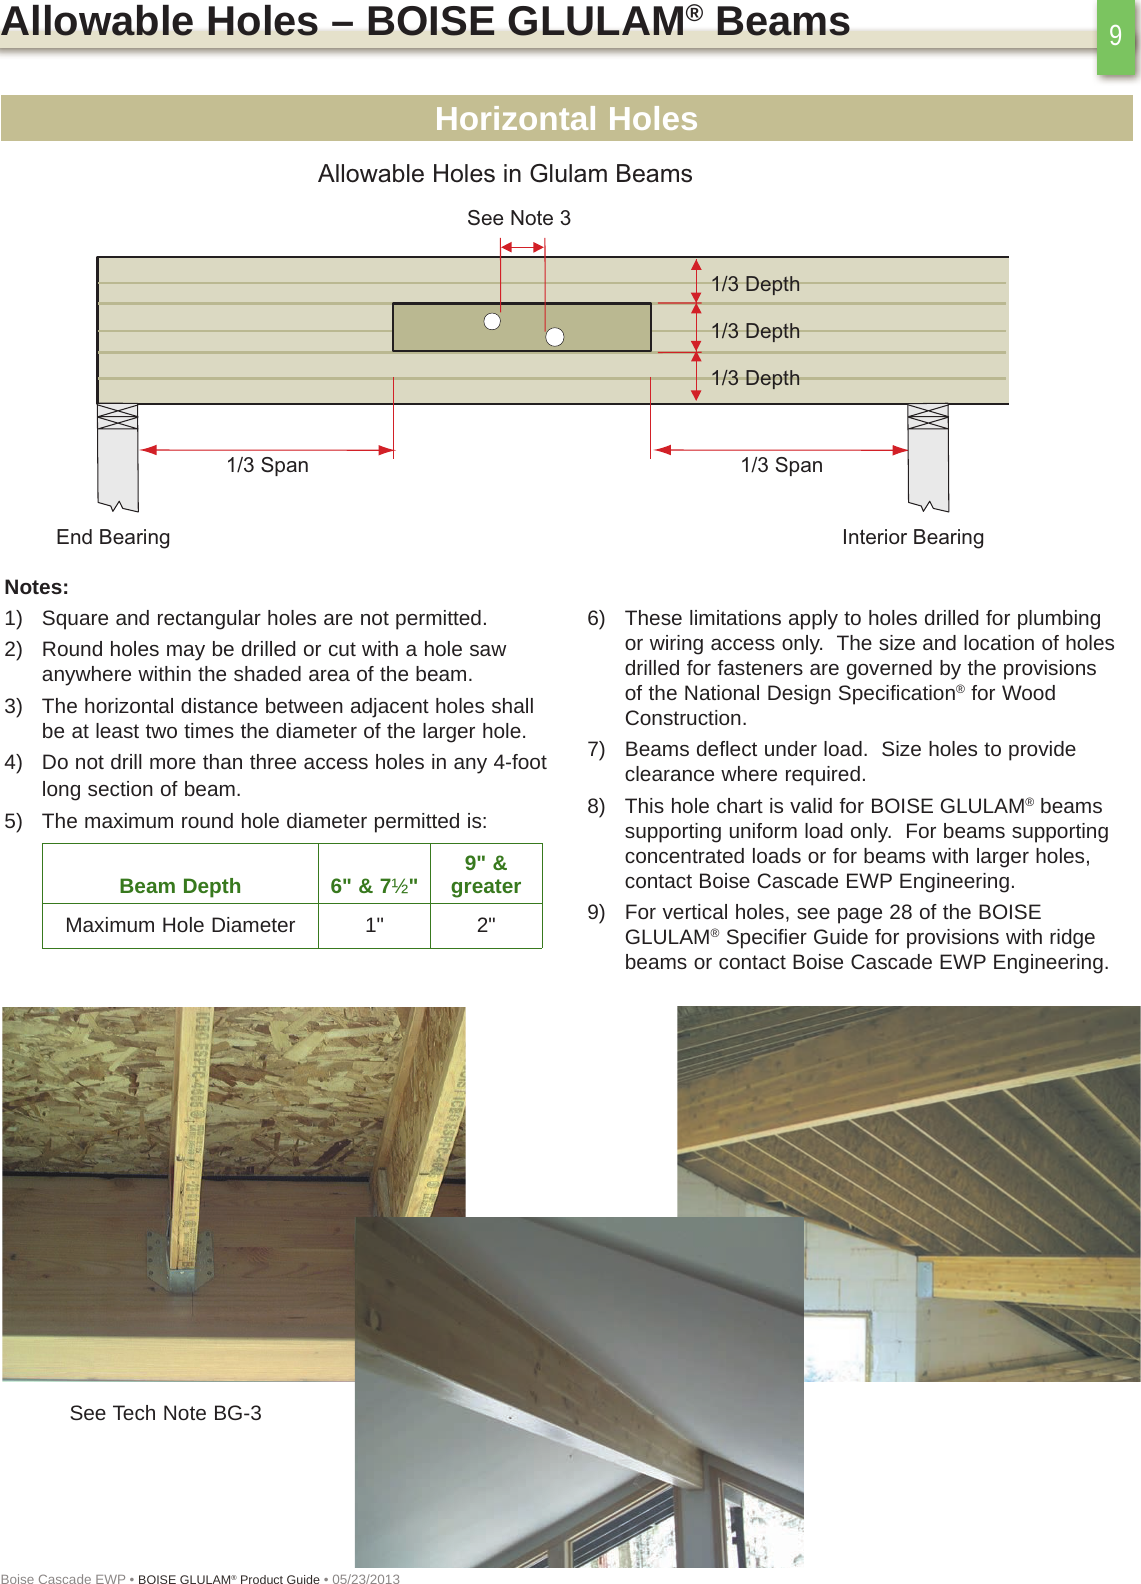 Page 9 of 12 - Boise Glulam Product Guide